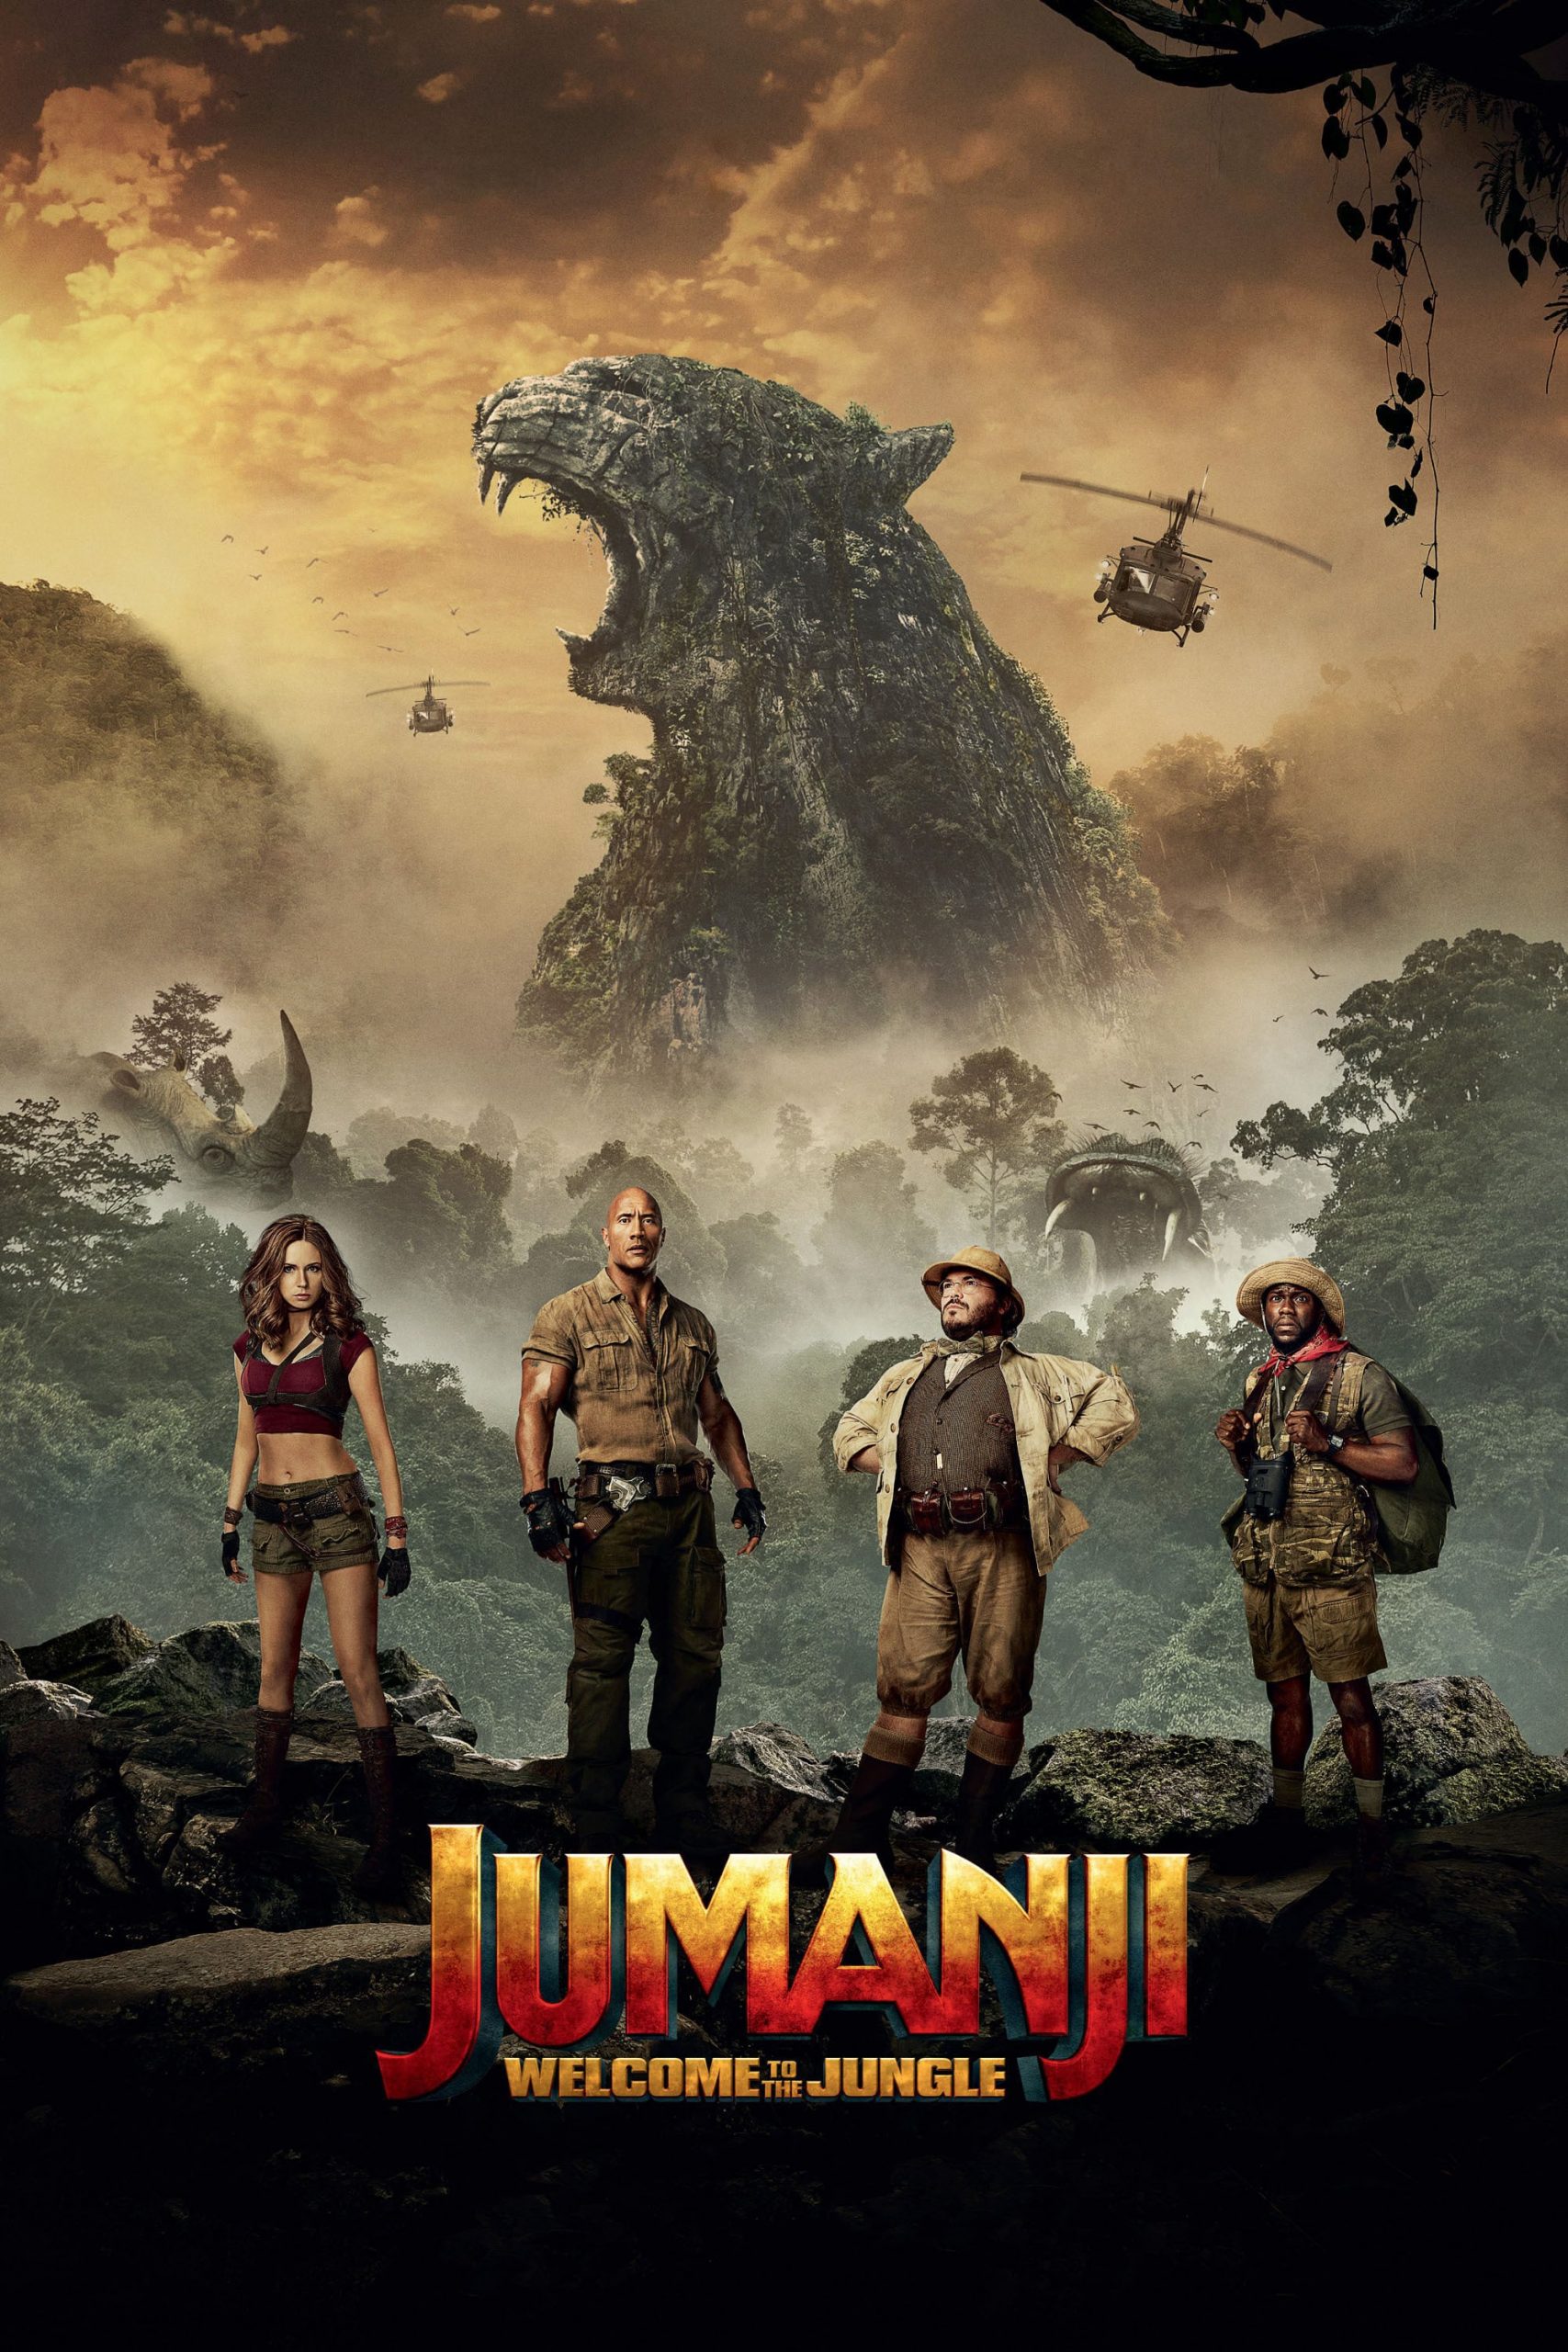 Poster for the movie "Jumanji: Welcome to the Jungle"